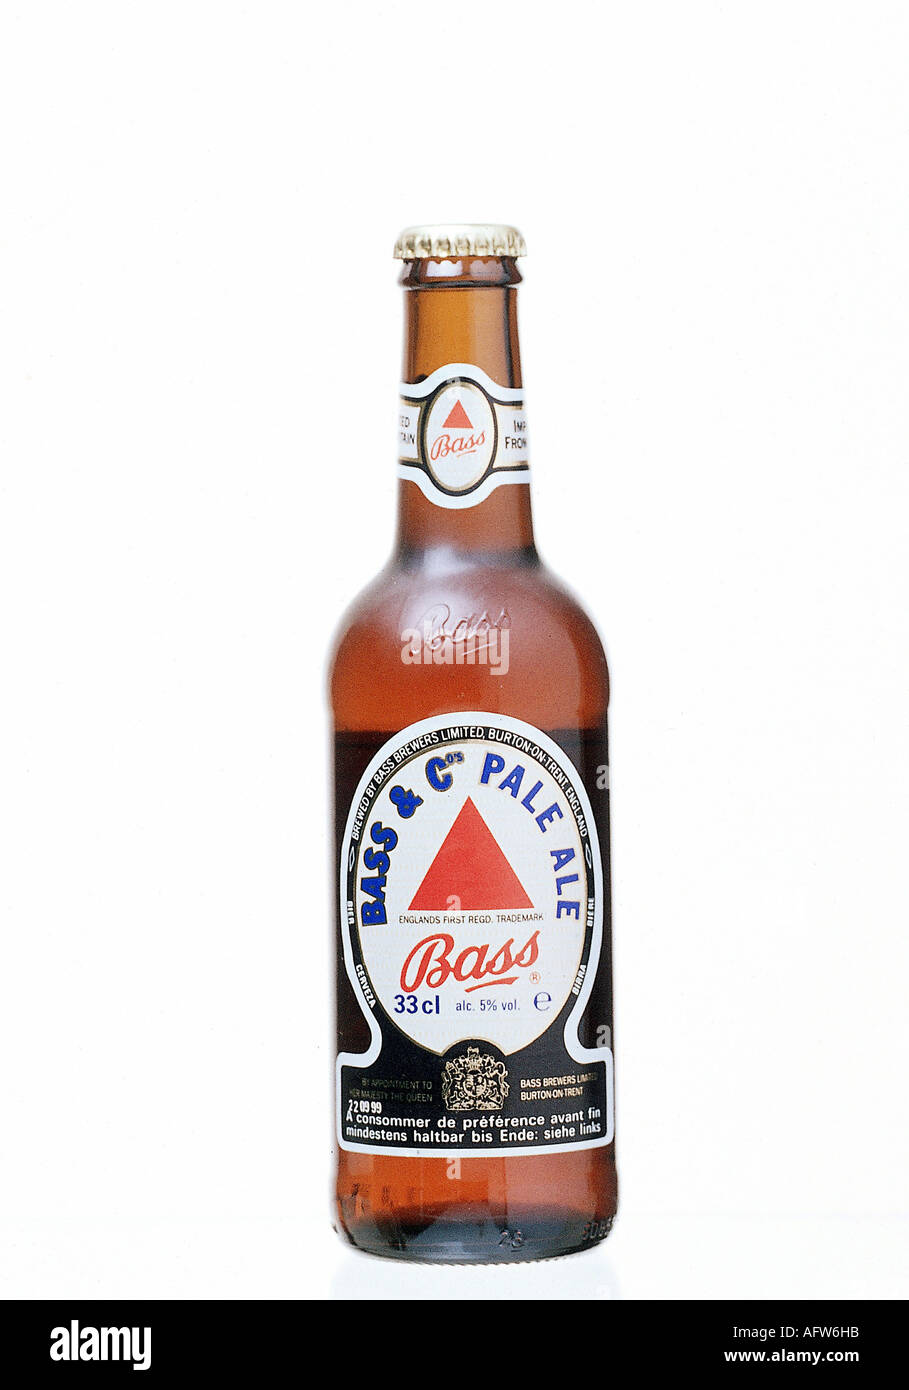 food and beverages, alcohol, beer, bottle 'Bass Pale Ale', Bass Brewers, Great Britain, bottles, Additional-Rights-Clearance-Info-Not-Available Stock Photo